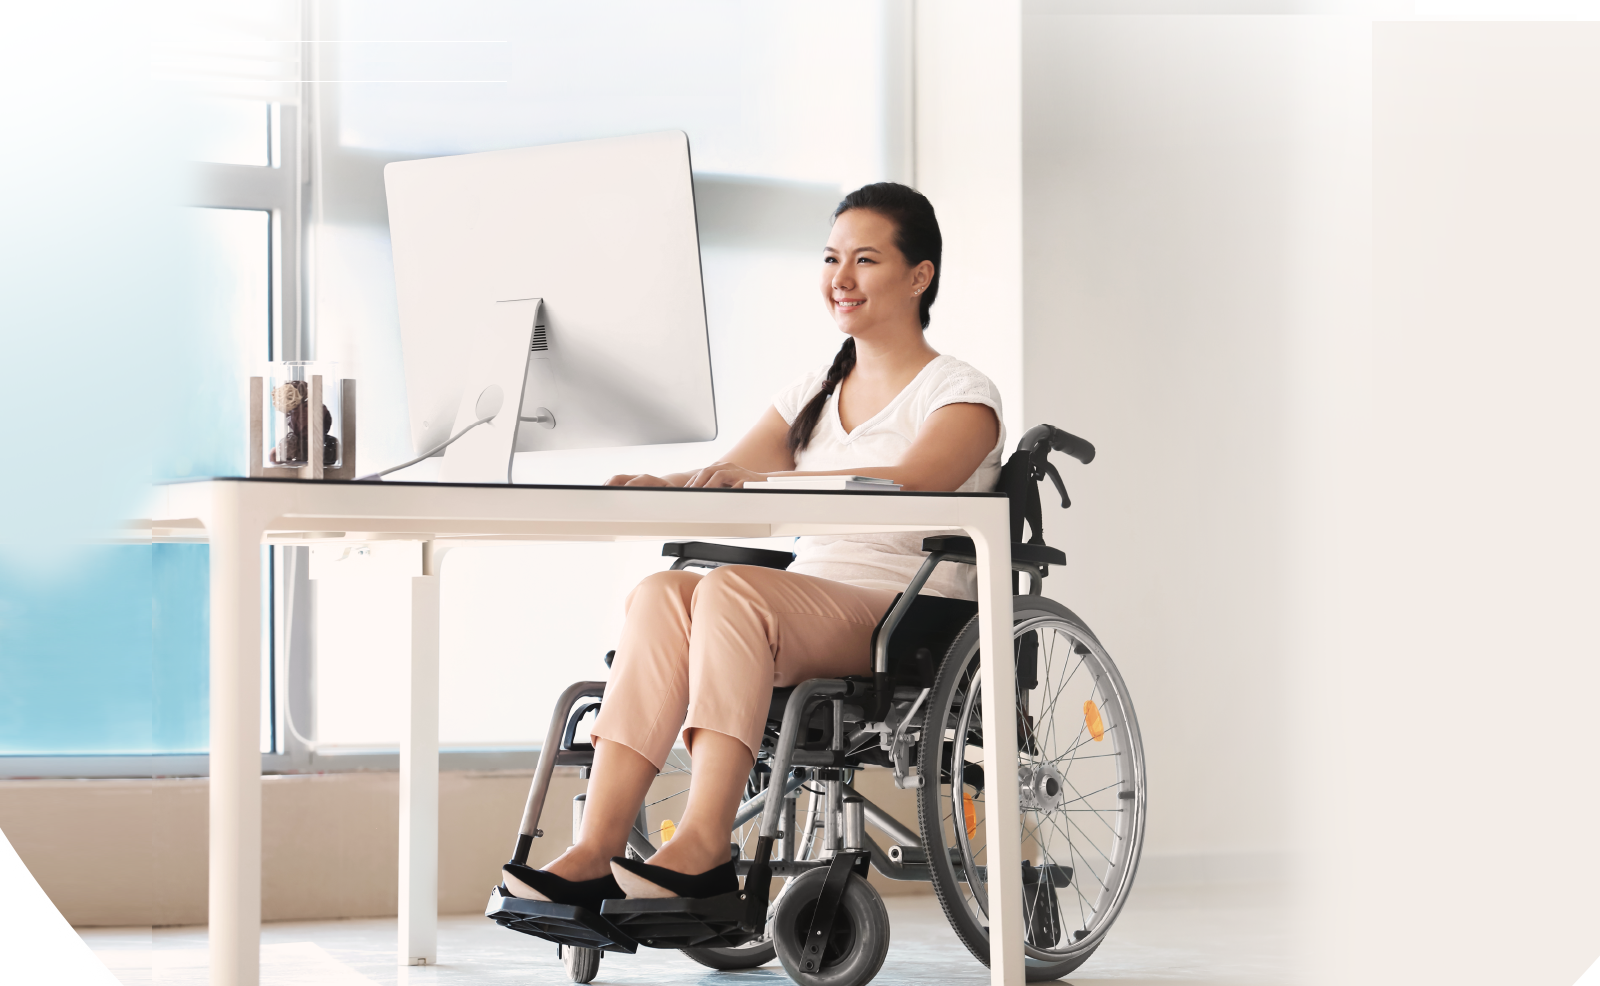 Illustrative image of a person on wheelchair looking at a computer screen